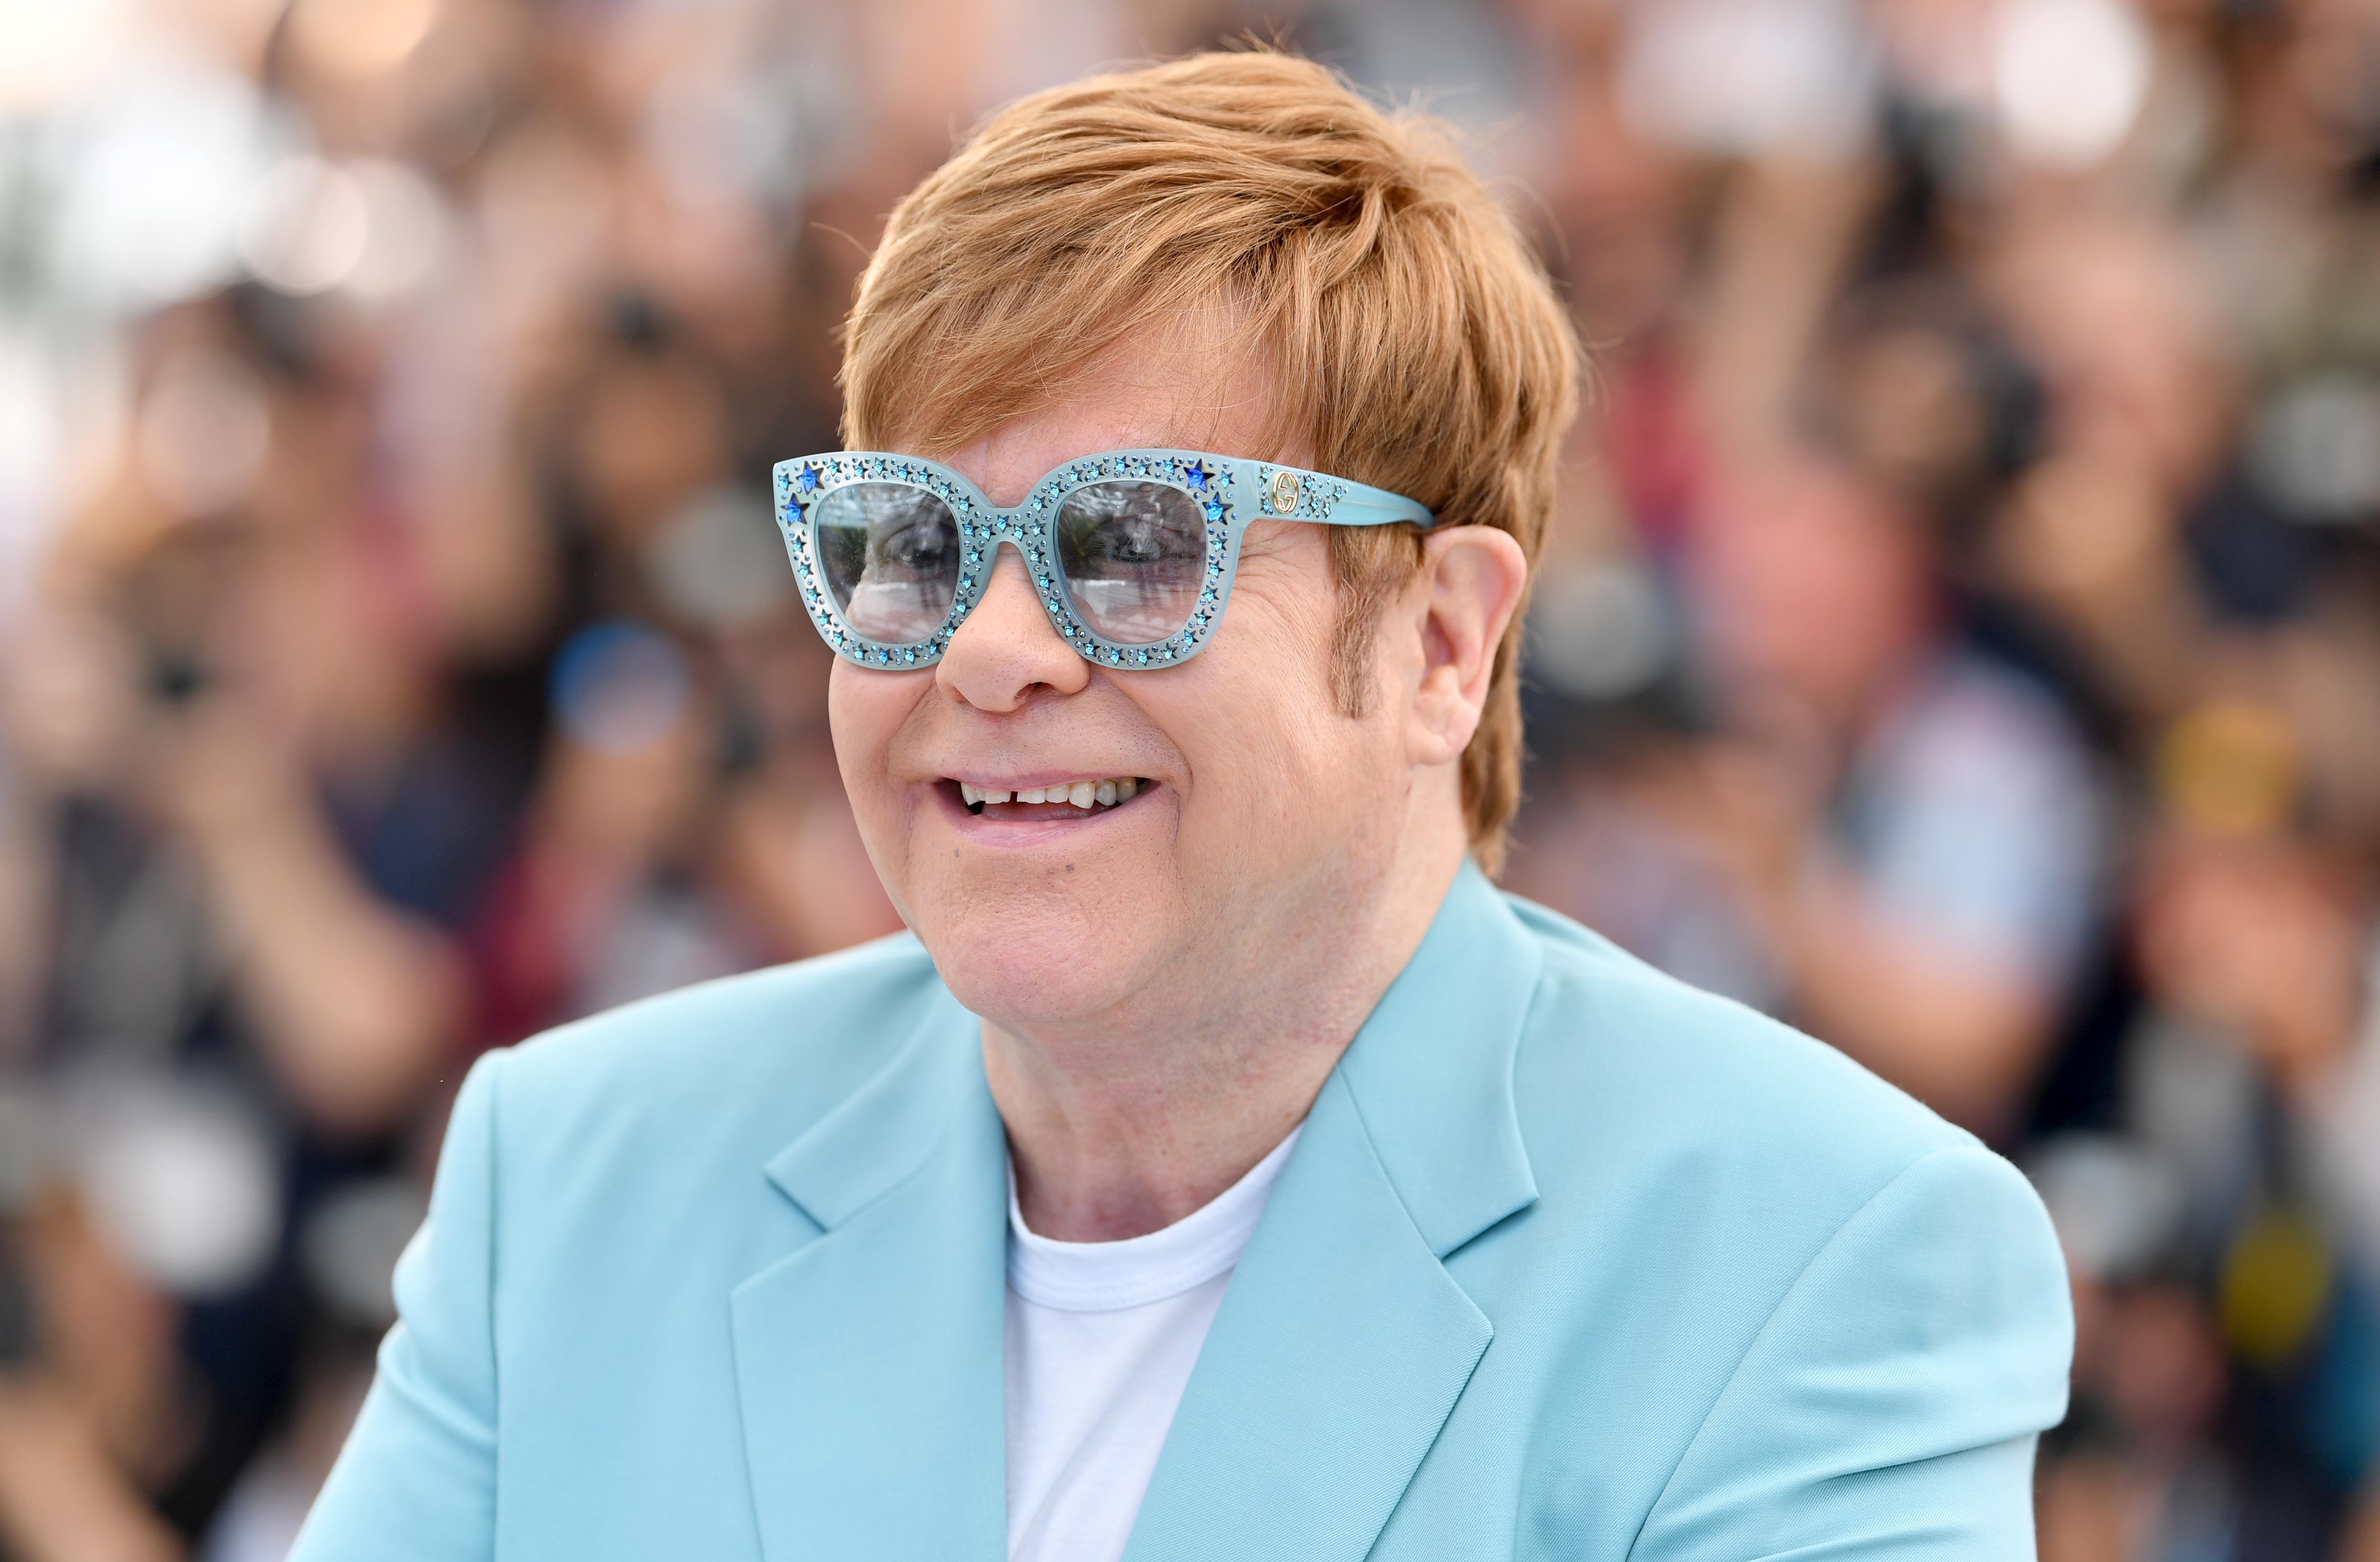  Elton John attends the photocall for "Rocketman" during the 72nd annual Cannes Film Festival on May 16, 2019. | Photo: Getty Images.